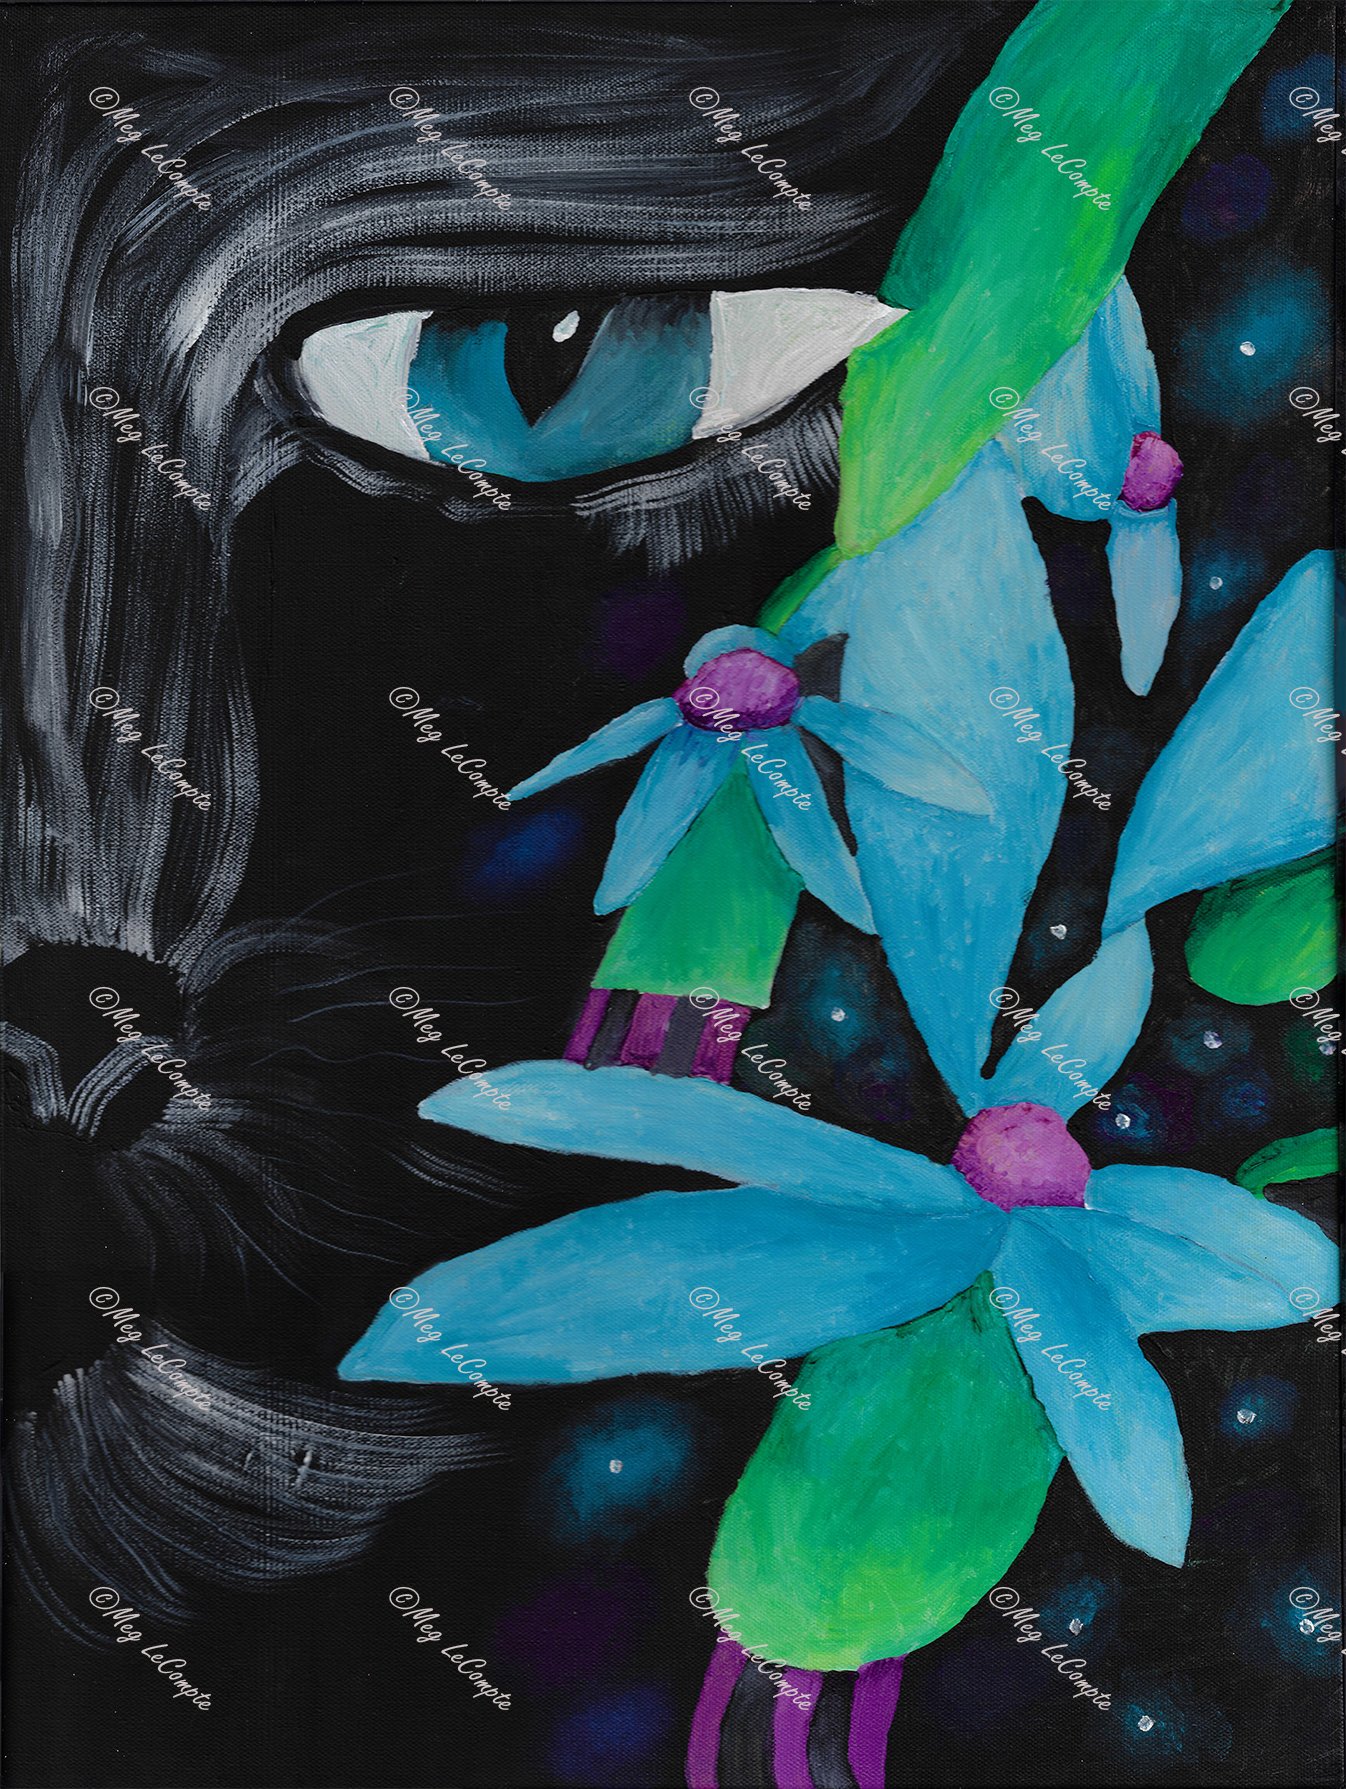 The Black Cat in the Flower with the Fireflies.watermark.jpg